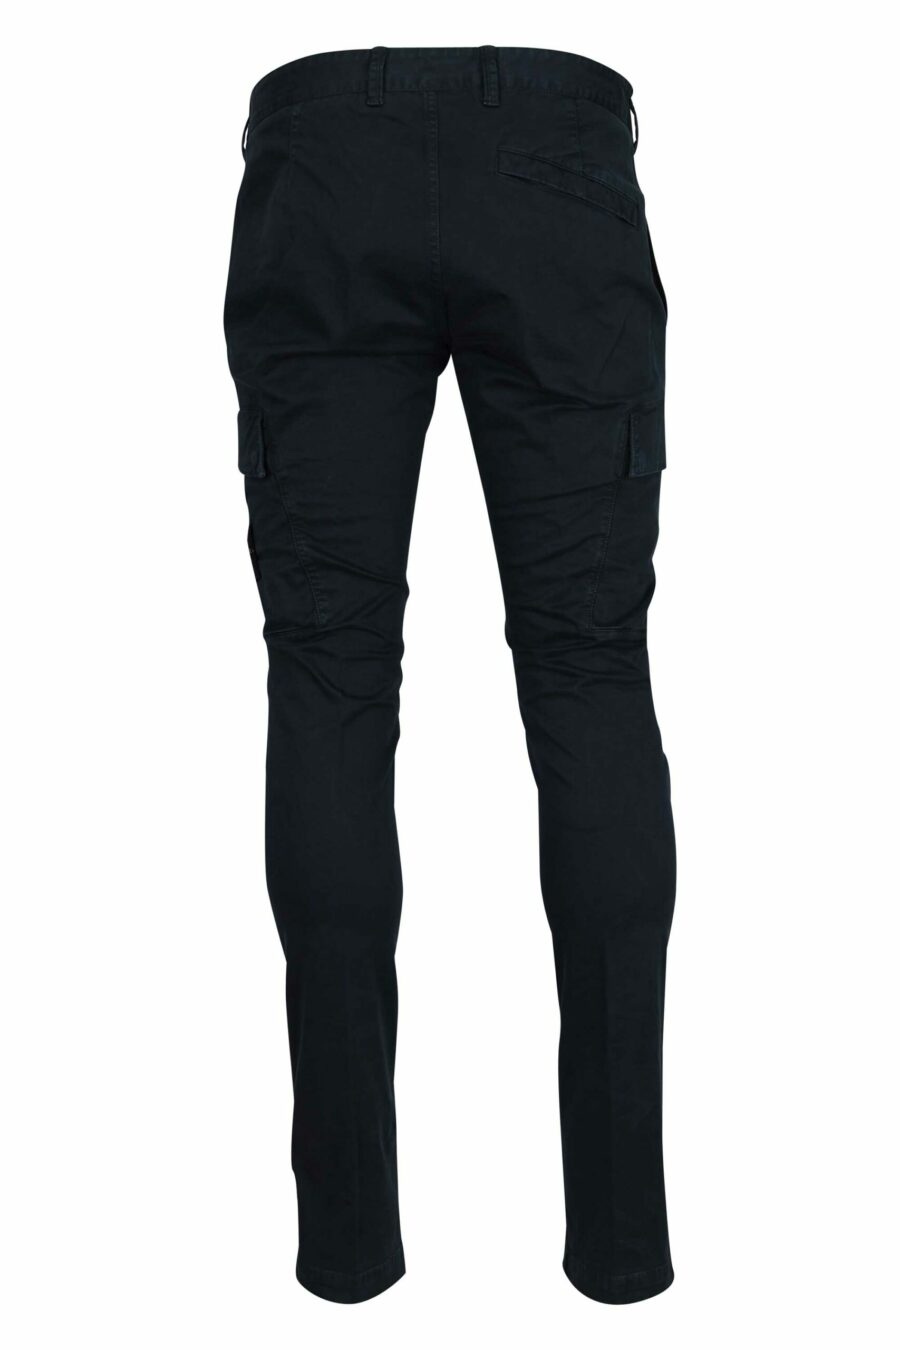 Dark blue skinny cargo cargo trousers with logo compass patch - 8052572938856 1 scaled